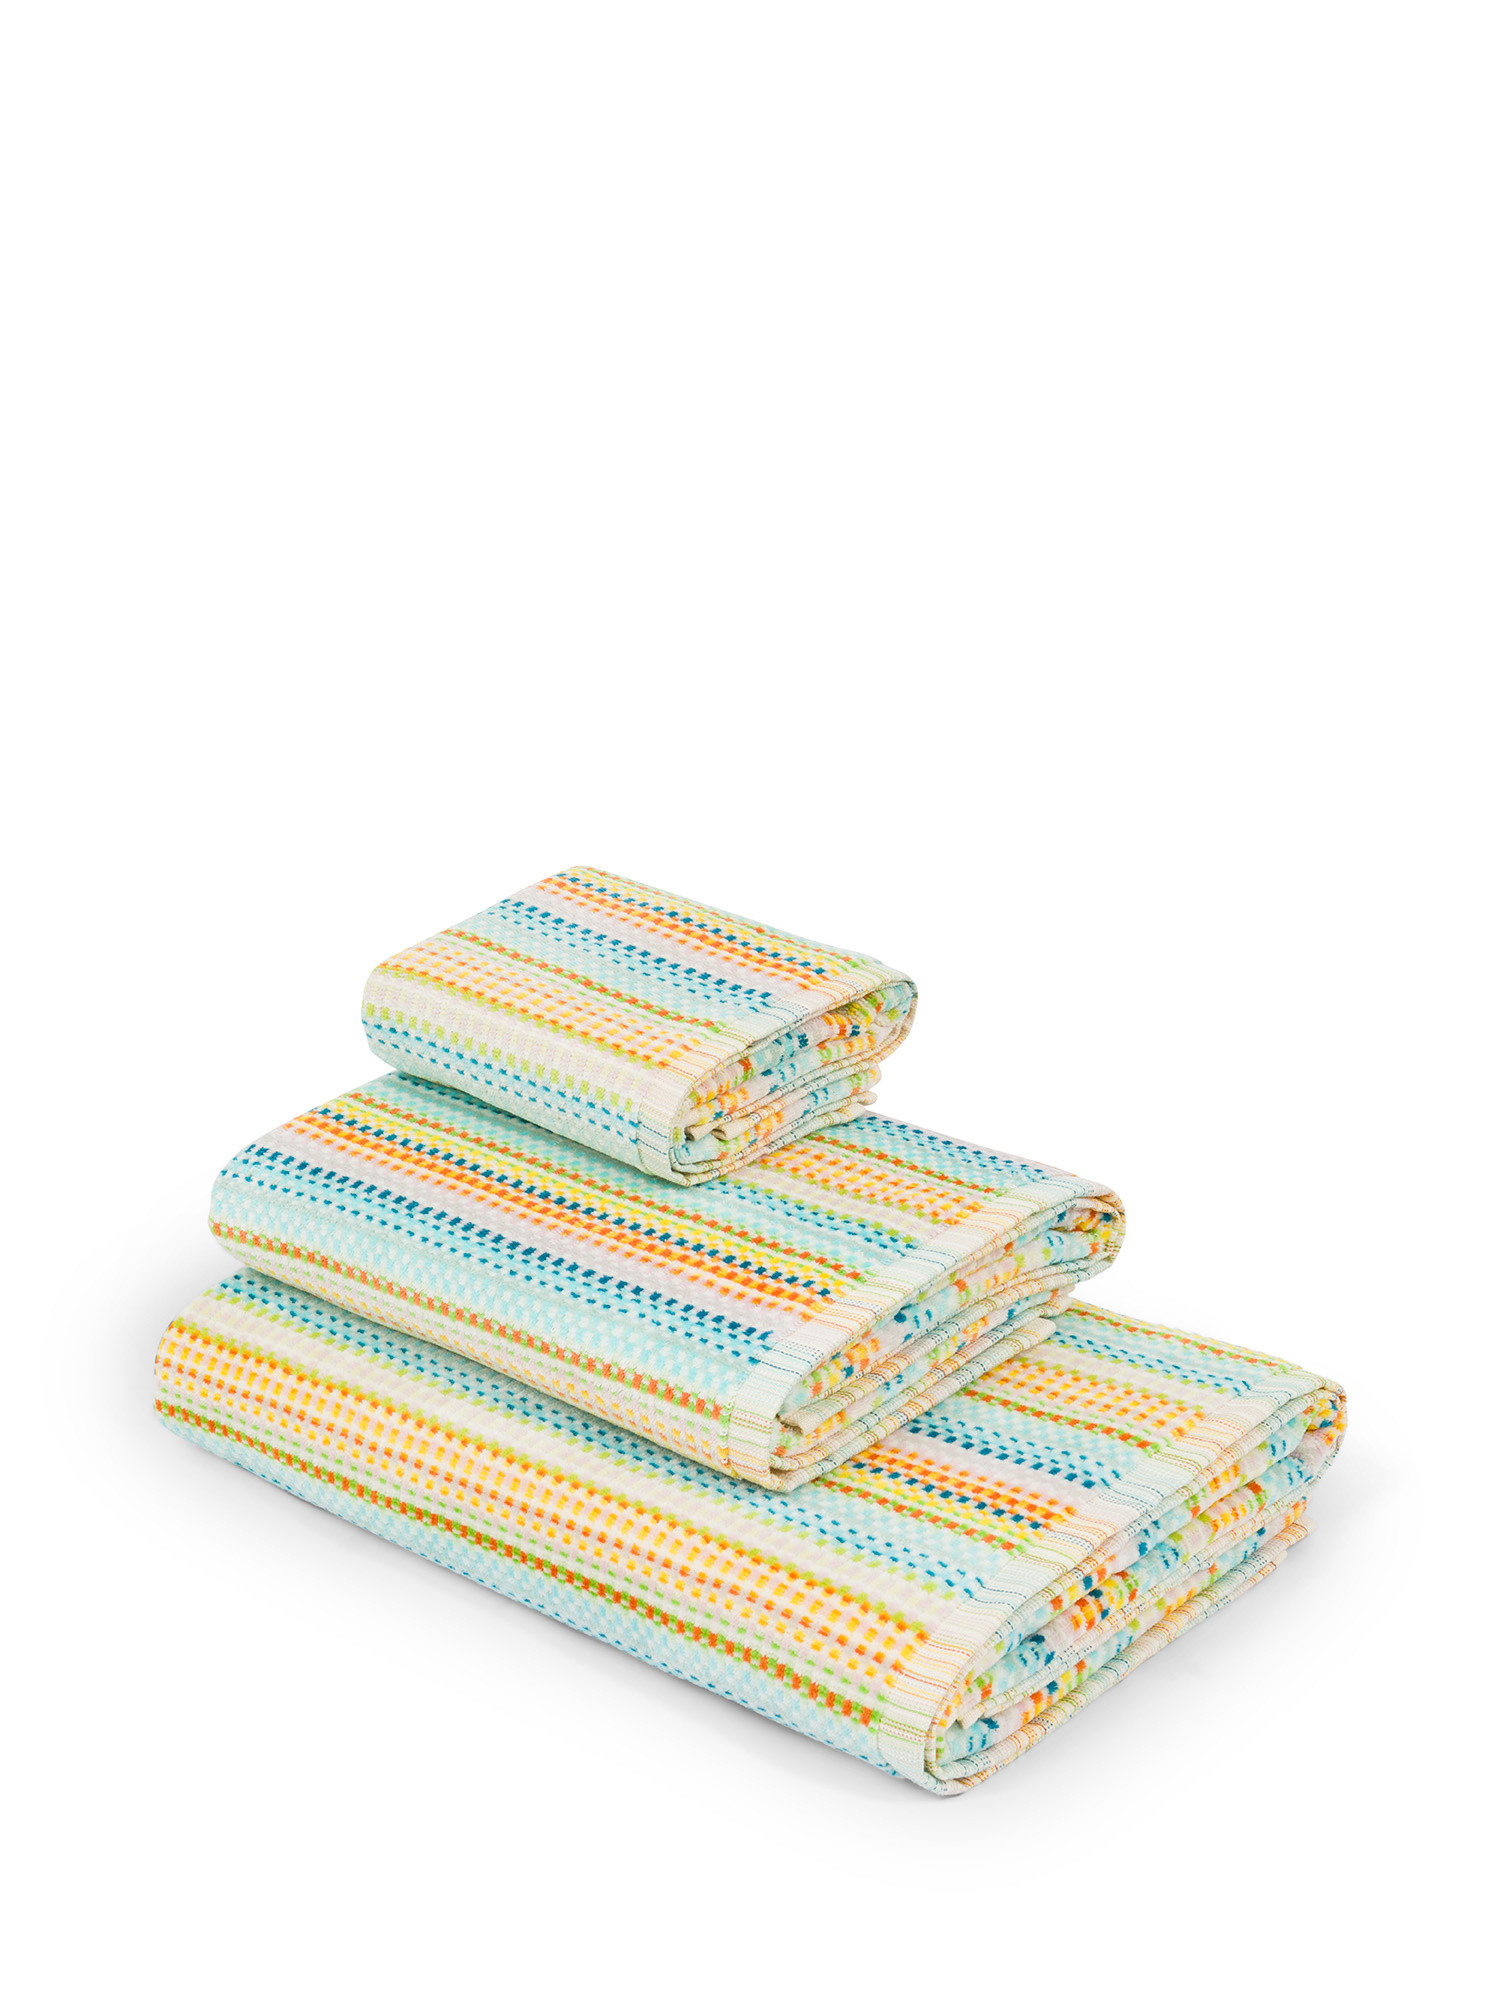 Cotton terry towel striped pattern, Multicolor, large image number 0